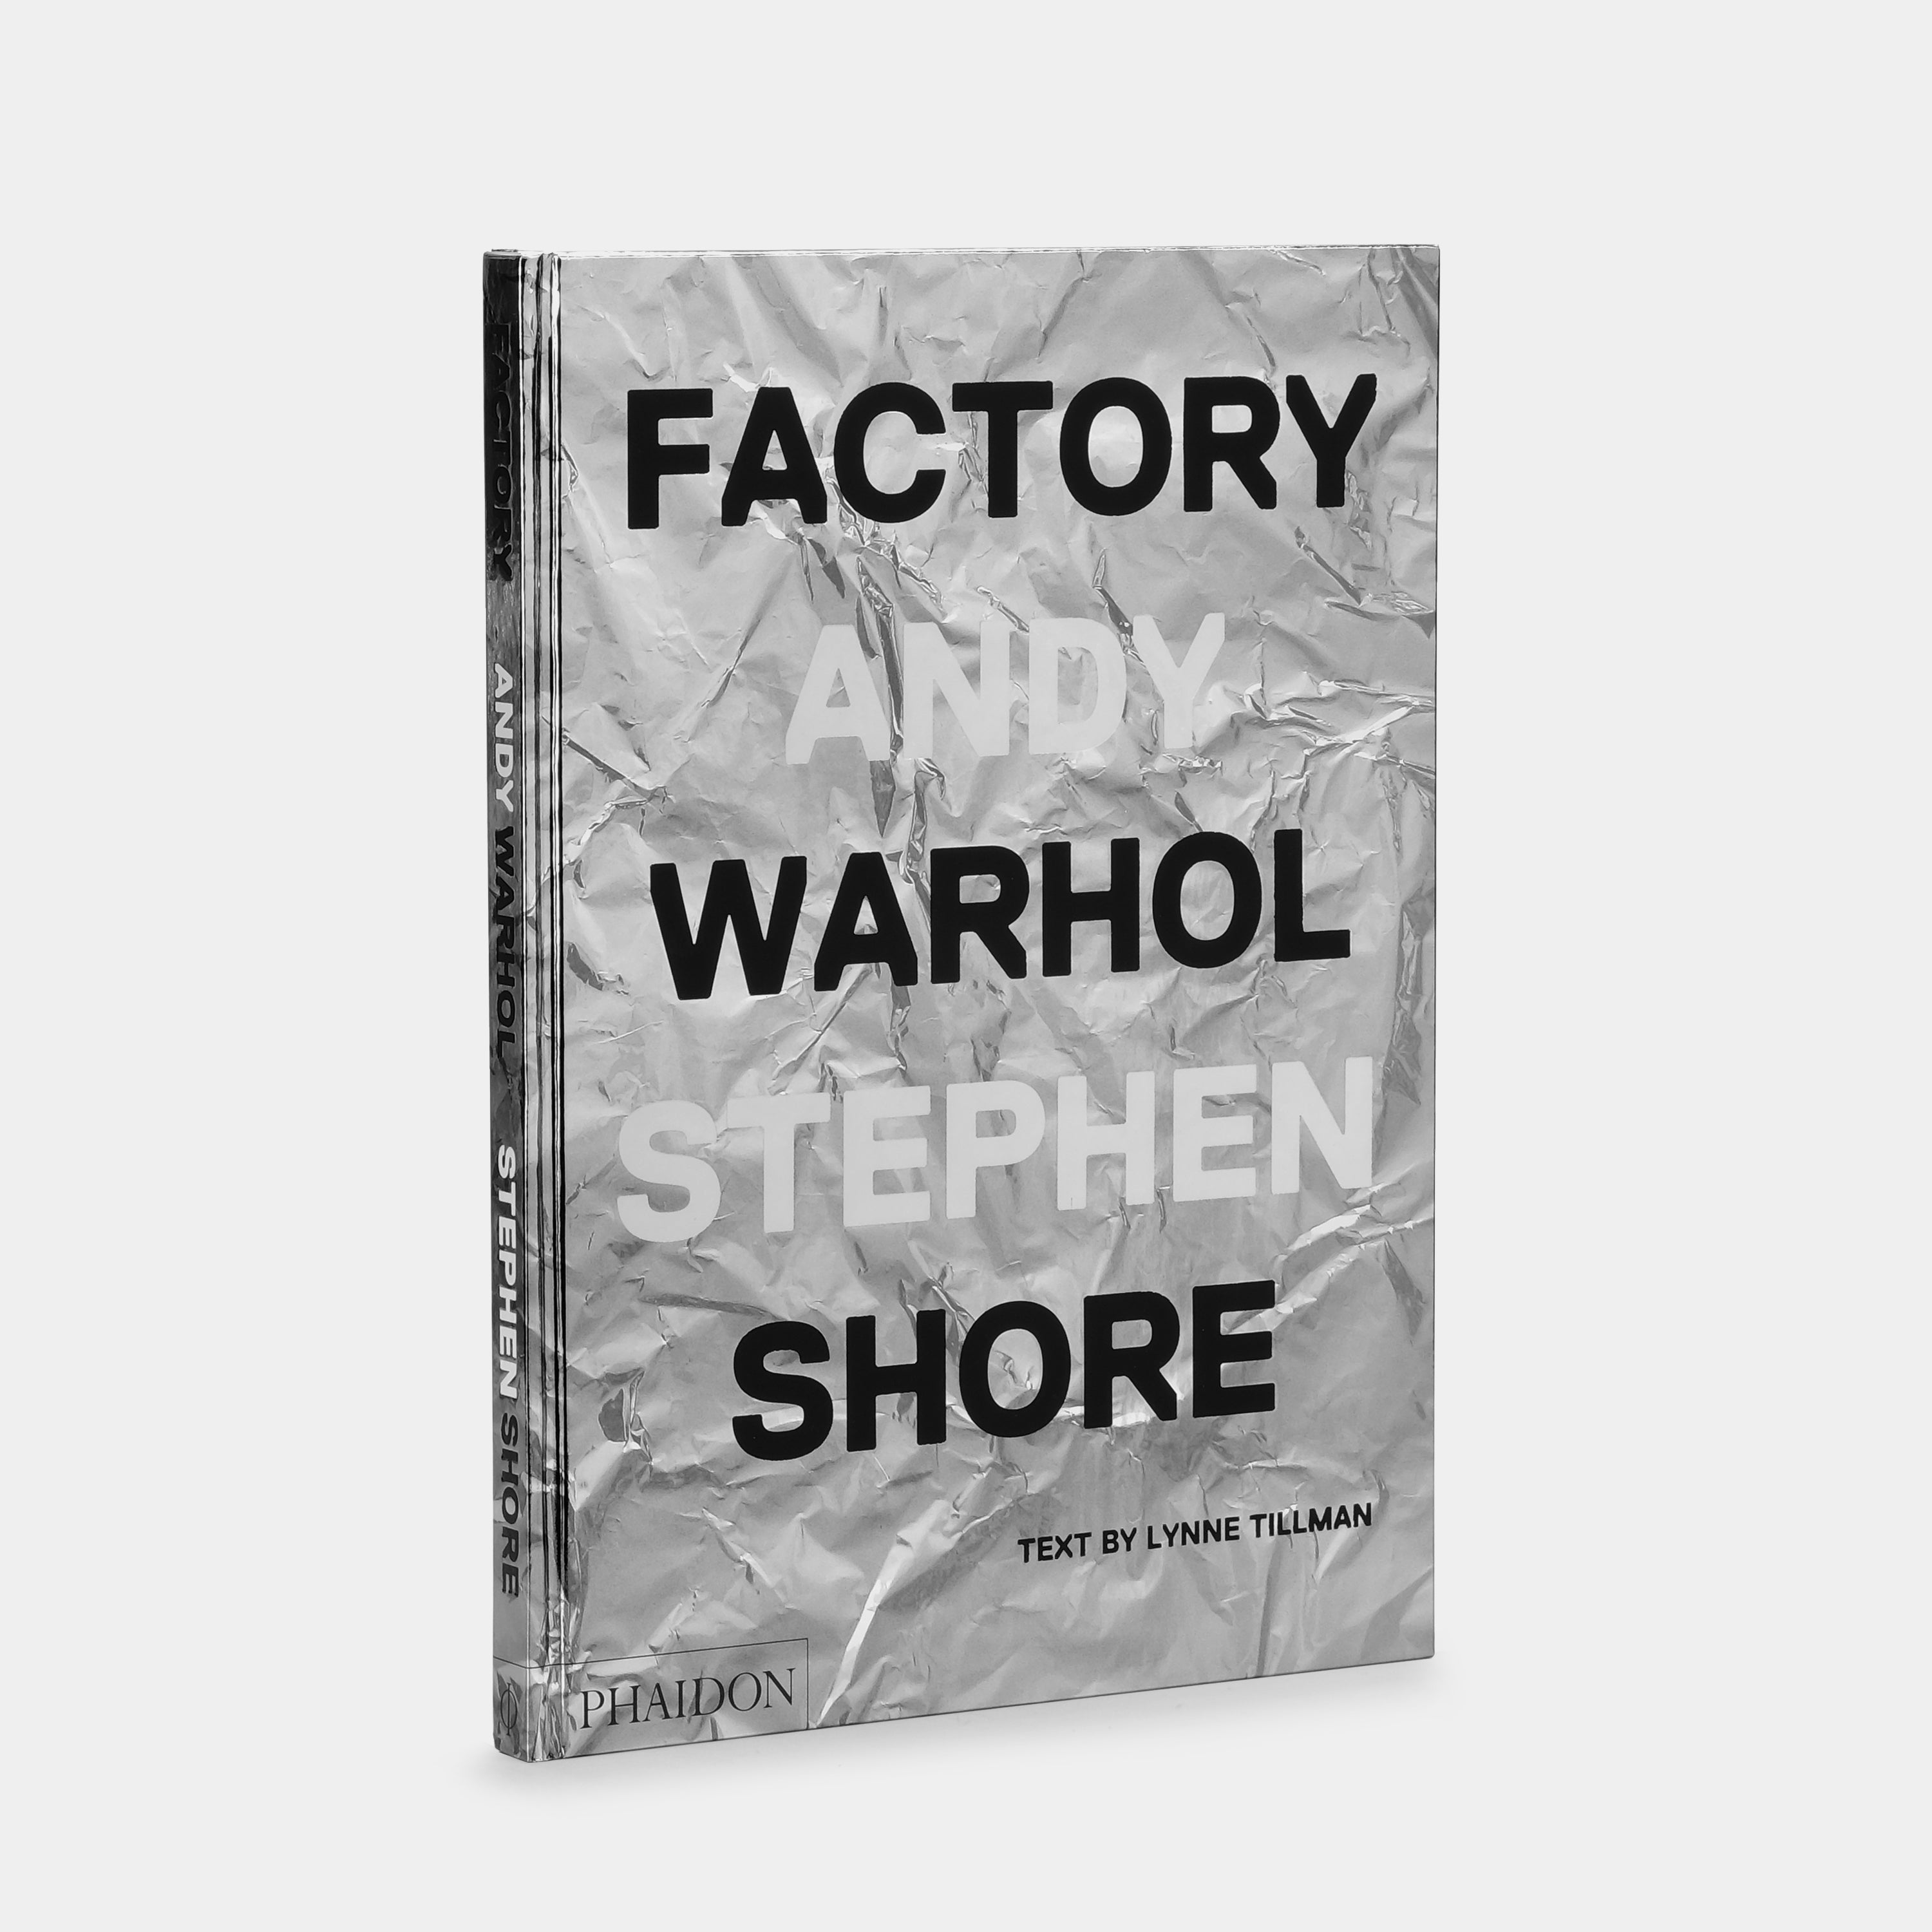 Factory: Andy Warhol by Stephen Shore Phaidon Book